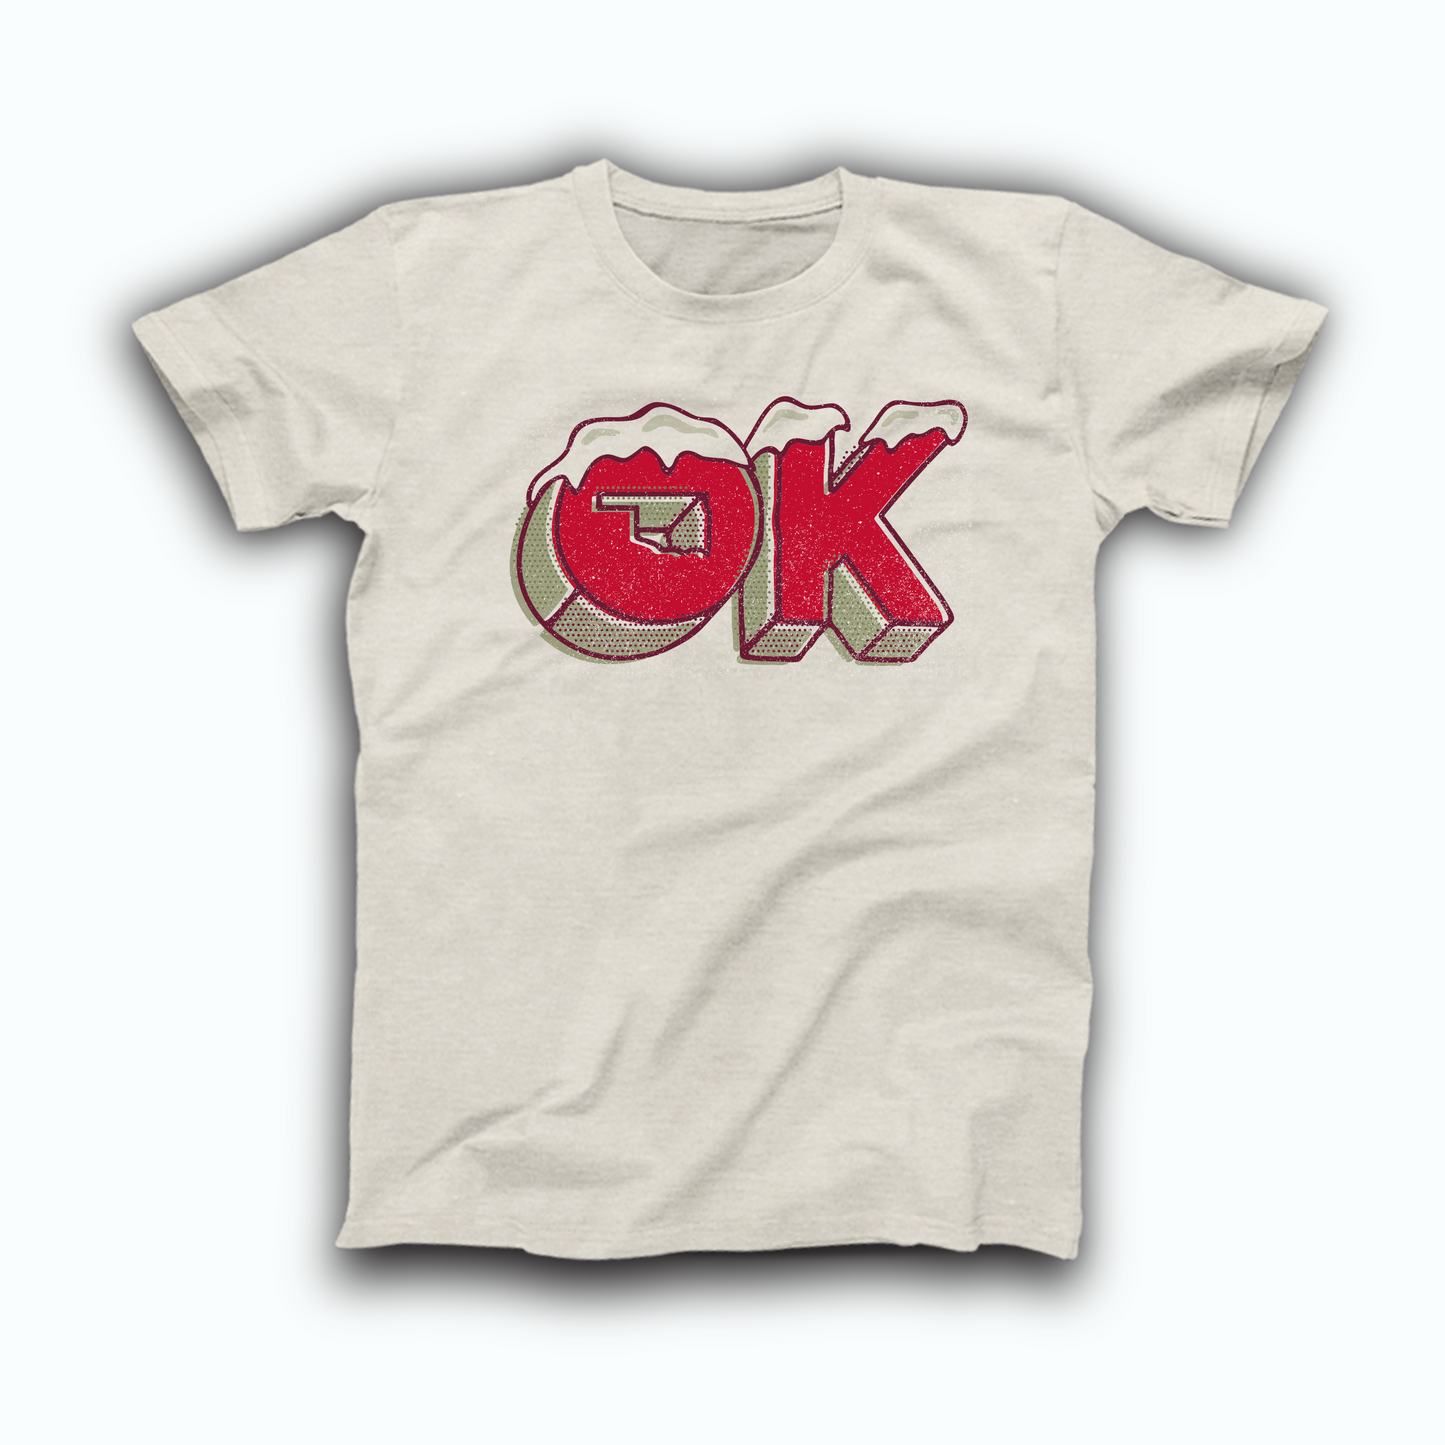 Heather Prism Natural colored Oklahoma t-shirt. The design is a pixel, red and green "OK" with snow piled on top and a cutout in the "O" of the state's shape.